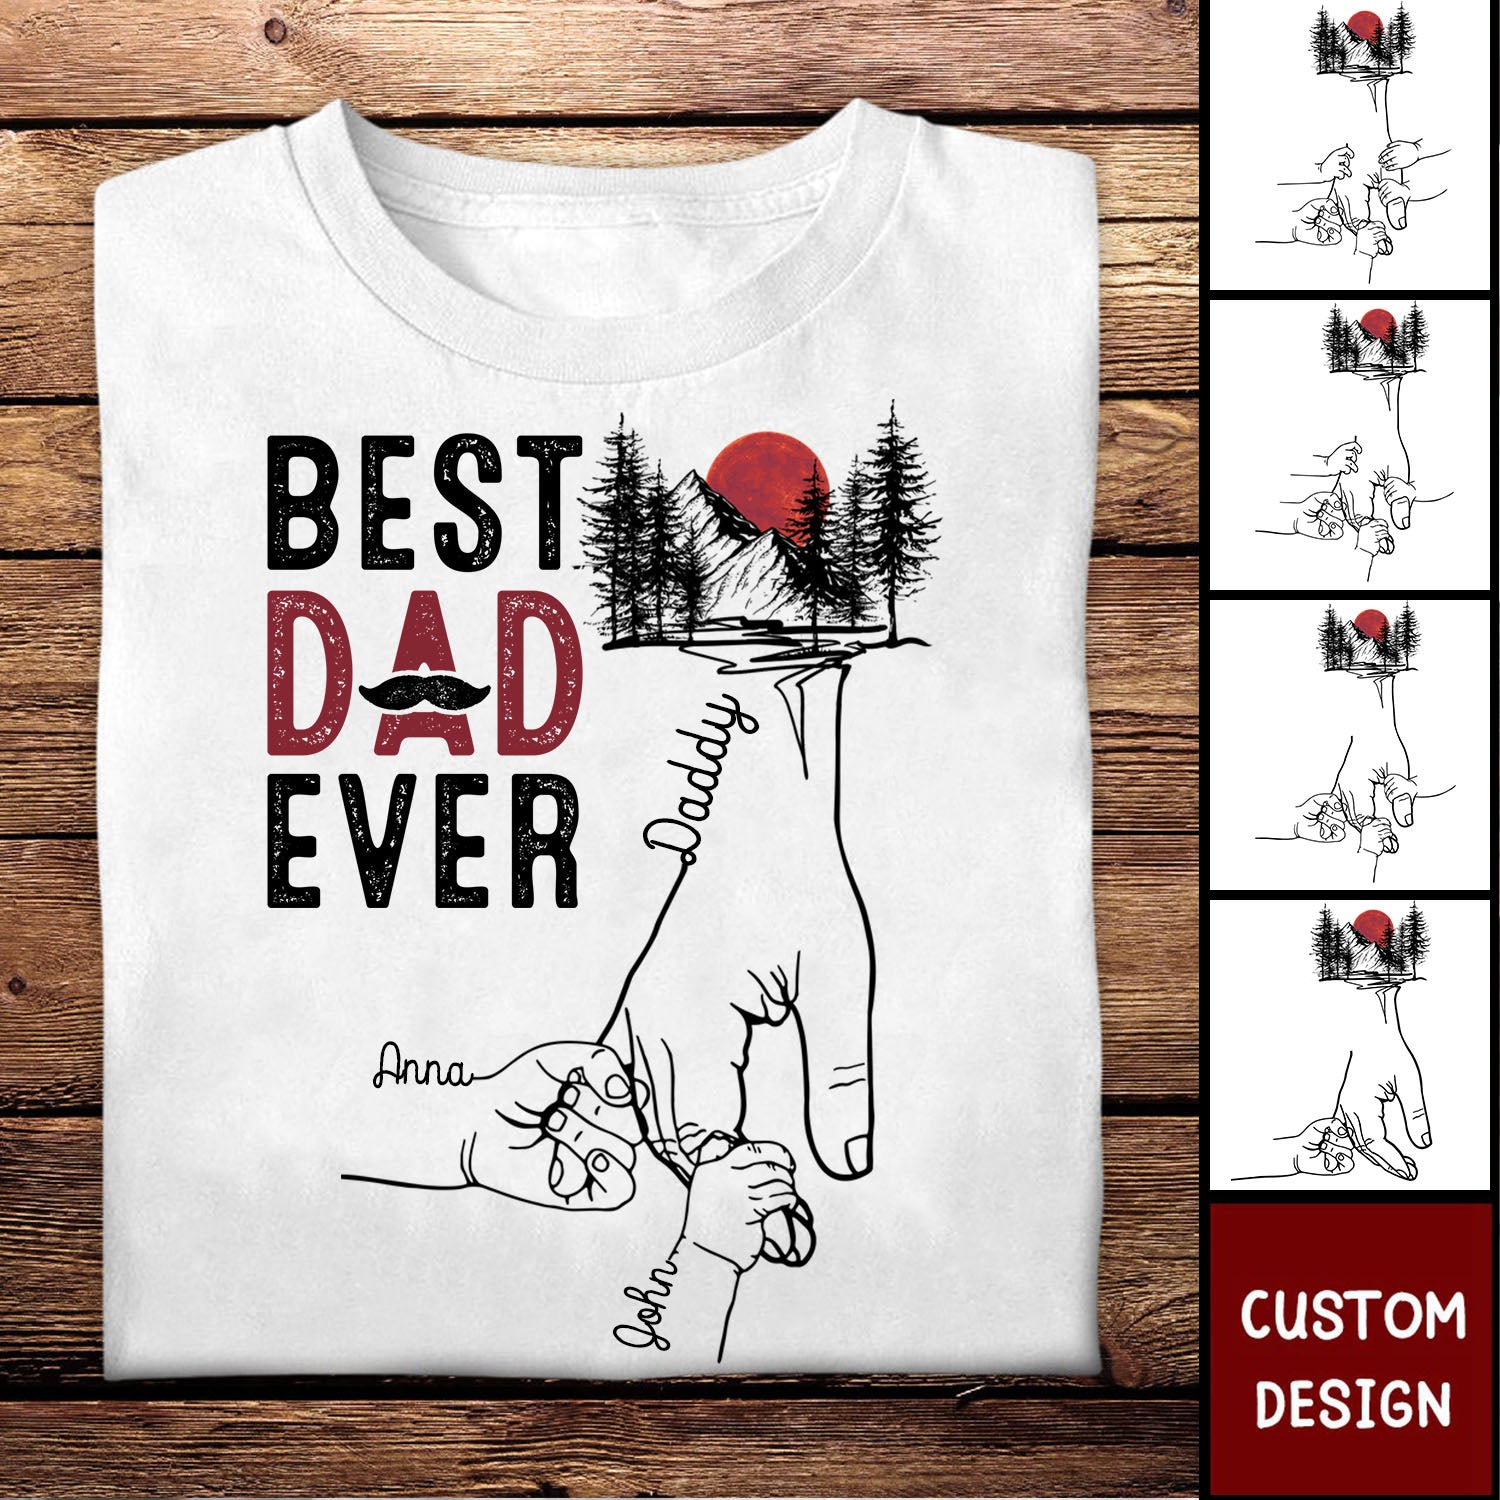 Best Dad Ever - Personalized Shirt